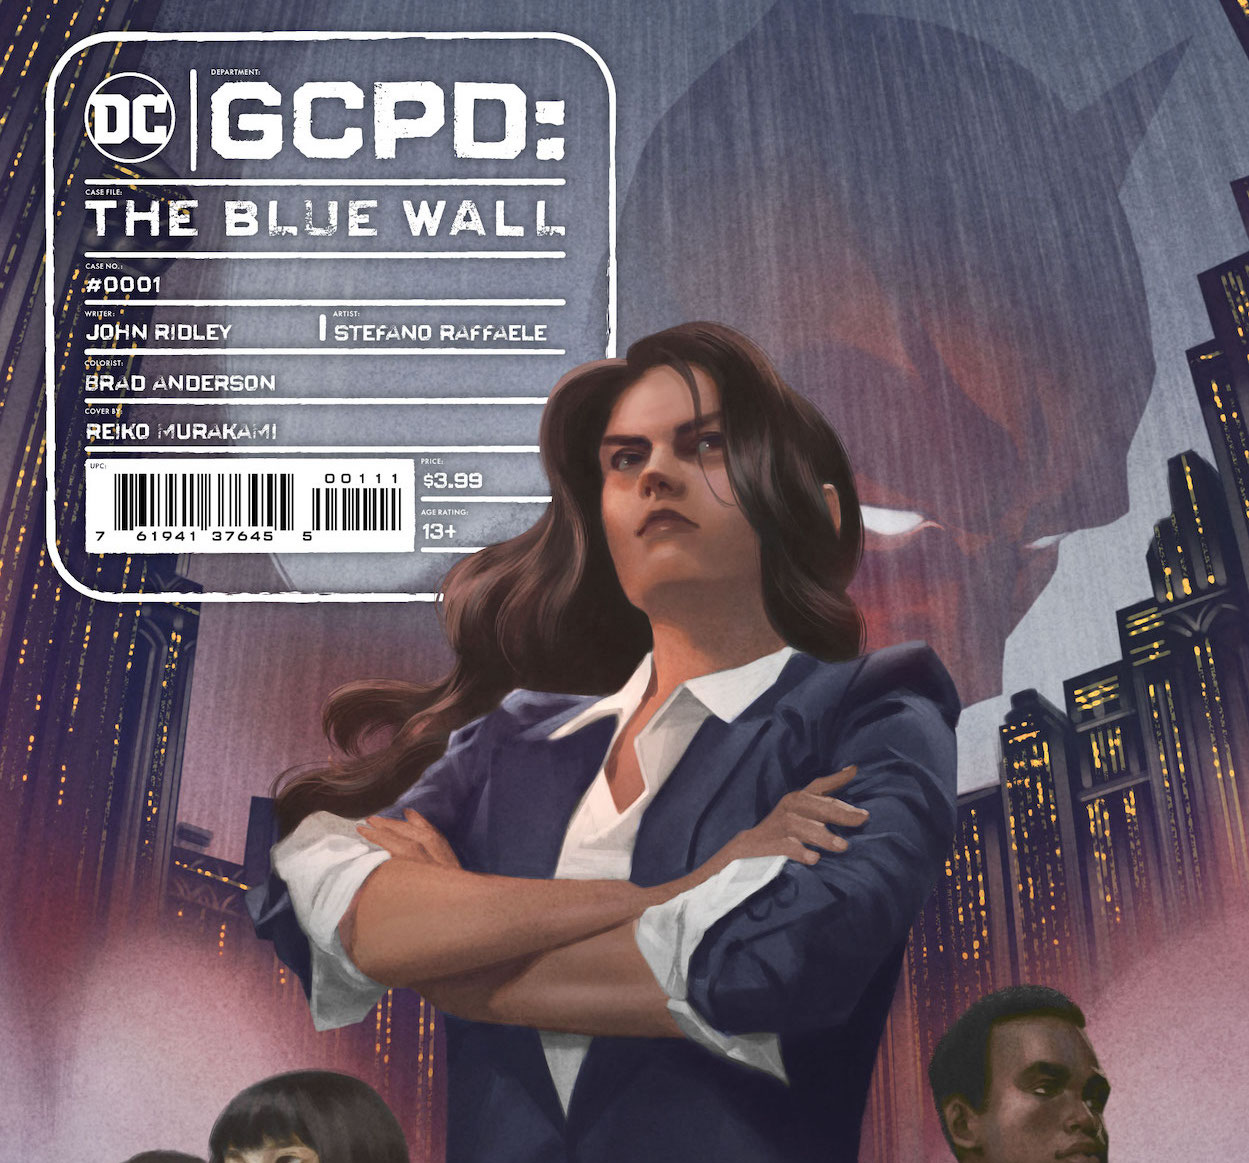 'GCPD: The Blue Wall' #1 is a fantastic and flawless first issue